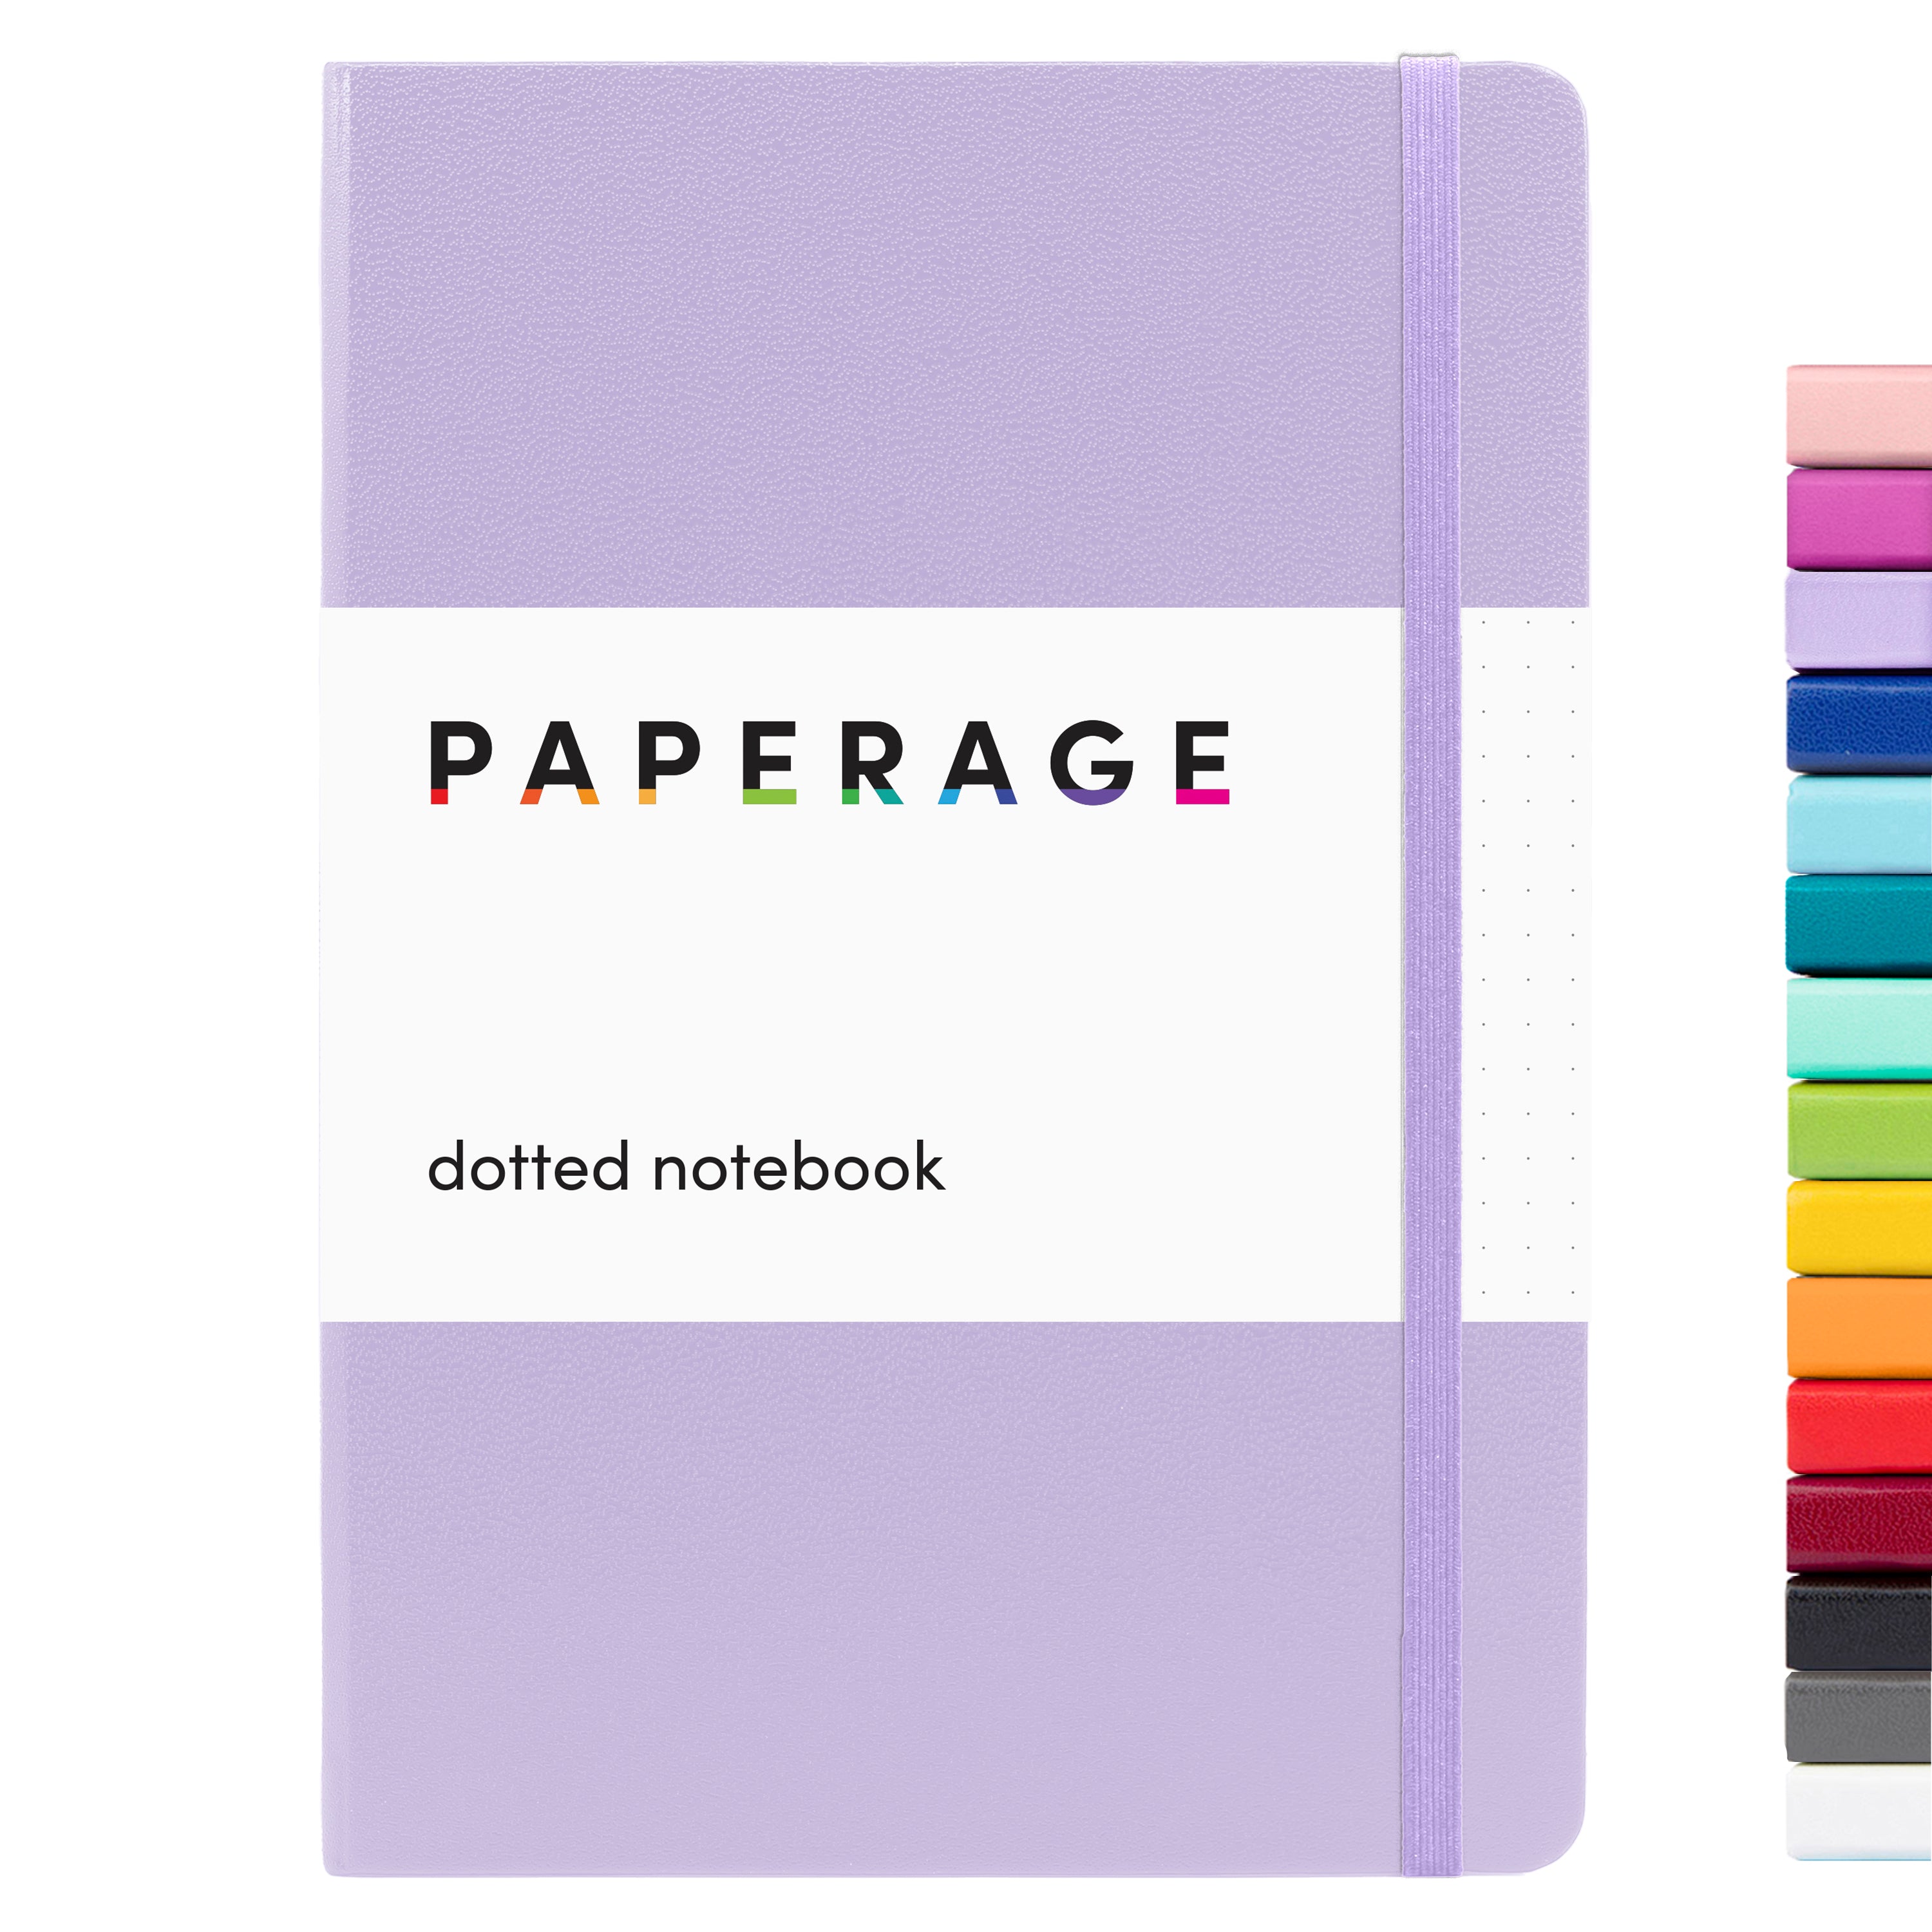 PAPERAGE Dotted Journal Notebook, (Raspberry), 160 Pages, Hardcover, 5.7” x  8” 